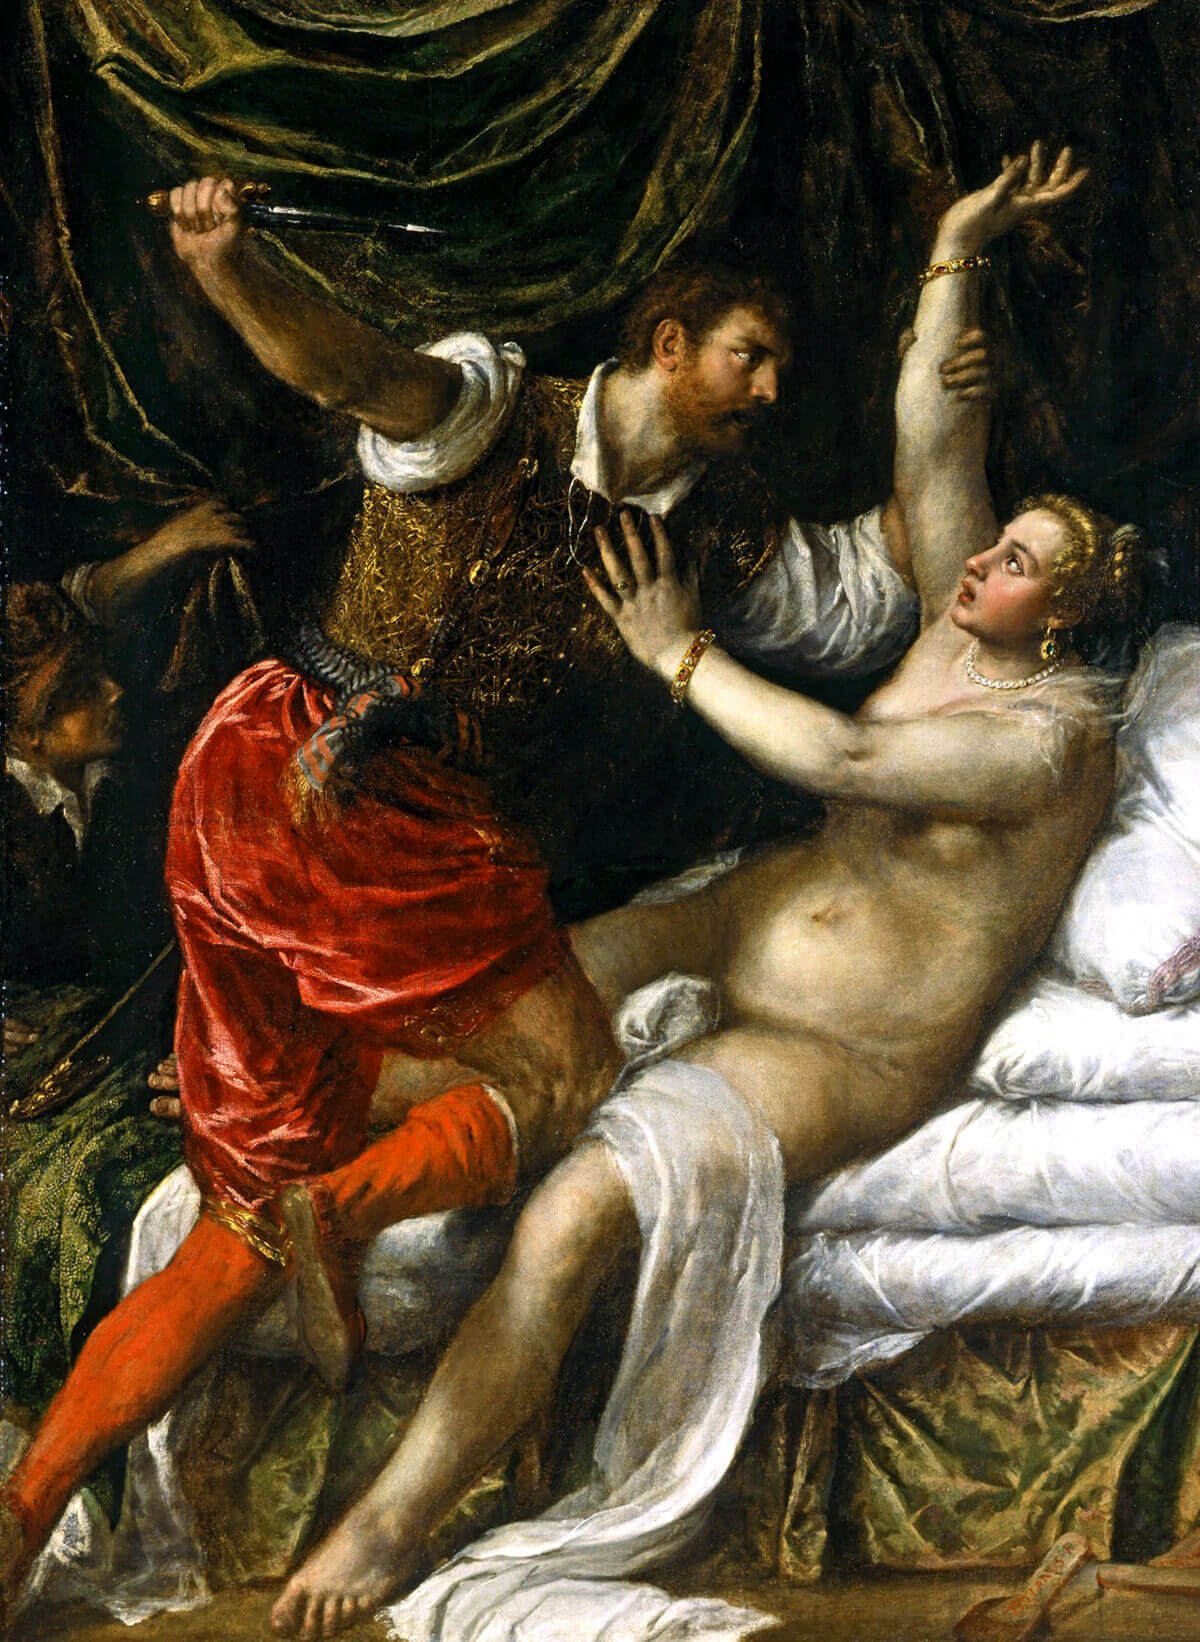 Tarquinius and Lucretia by Titian (1571), a depiction of the rape of Lucretia by Sextus Tarquinius